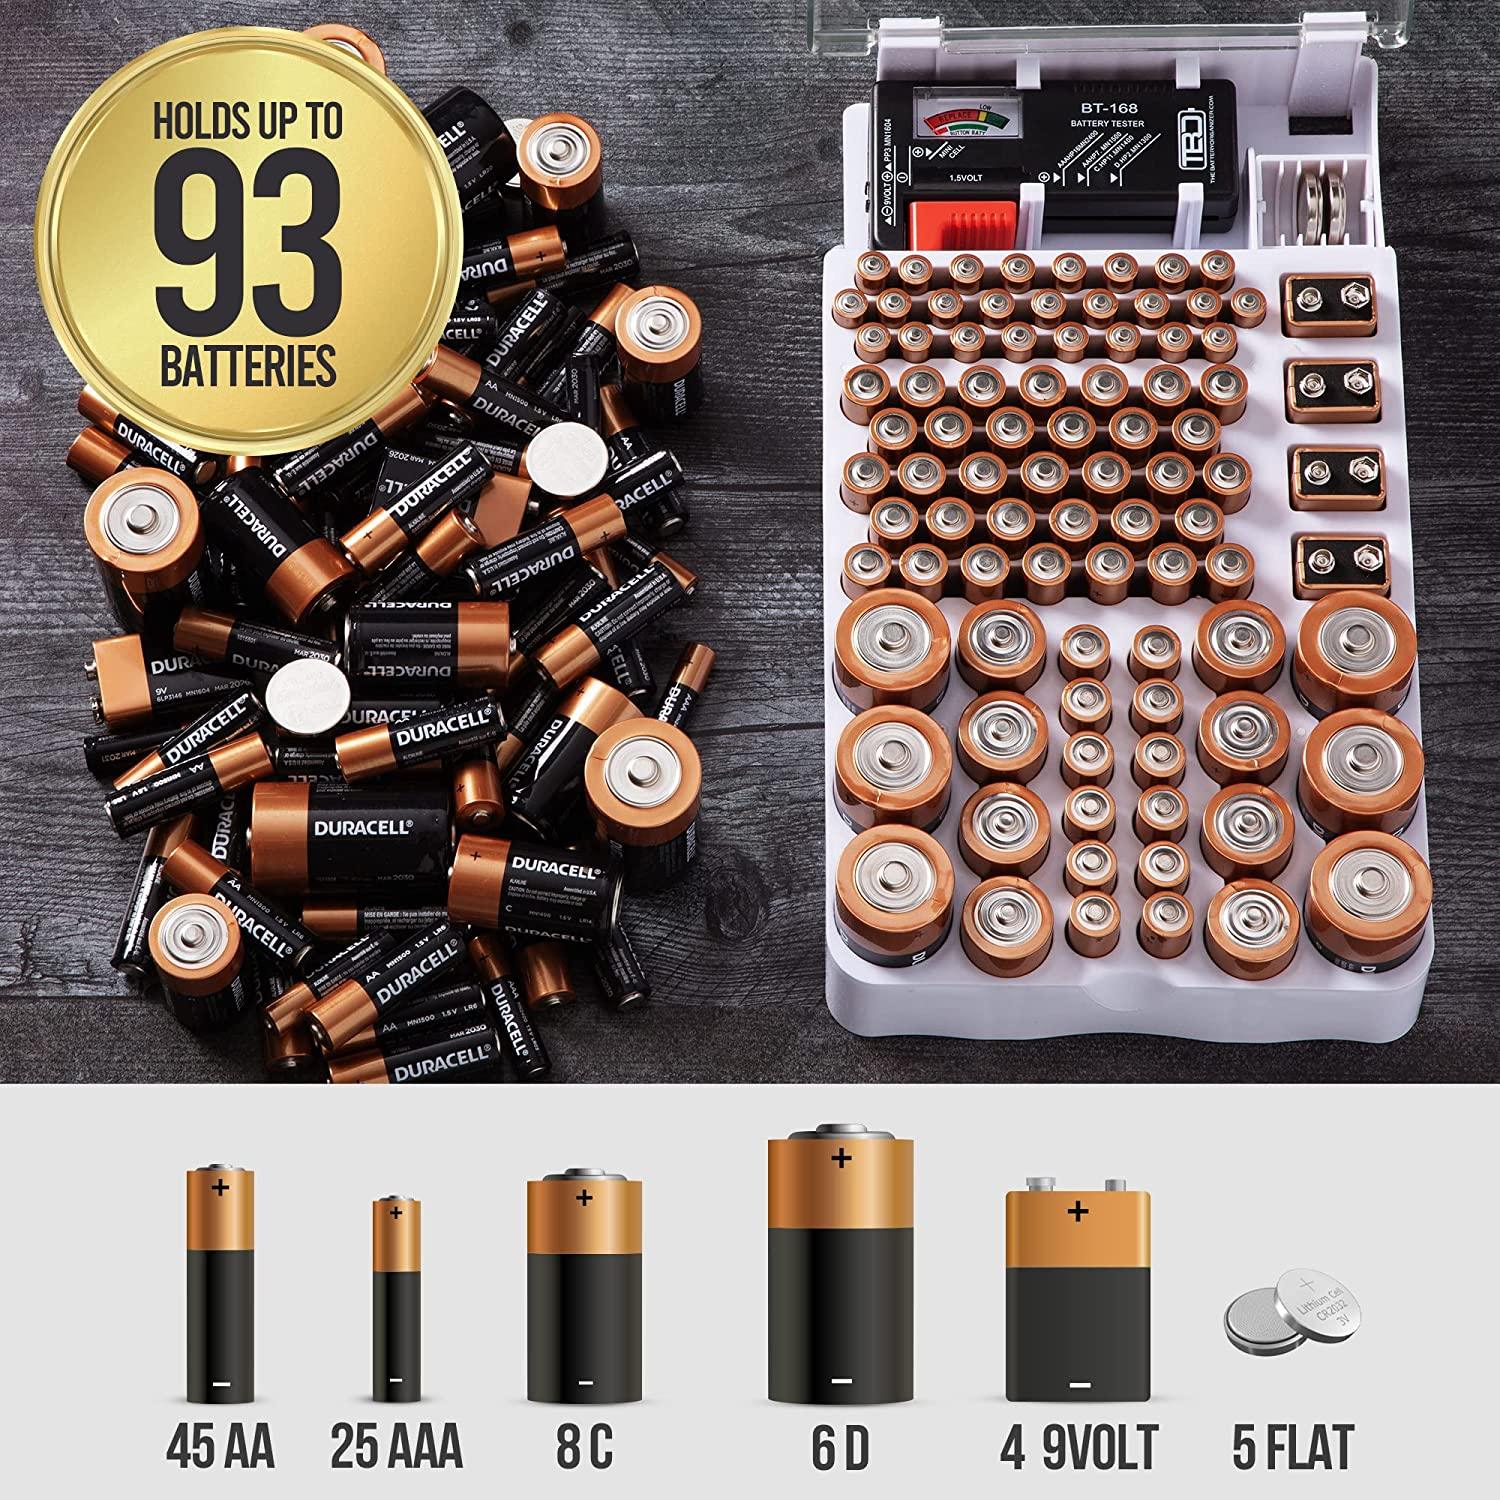 The Battery Organizer and Tester with Cover, Battery Storage Organizer and Case, Holds 93 Batteries - Lasercutwraps Shop